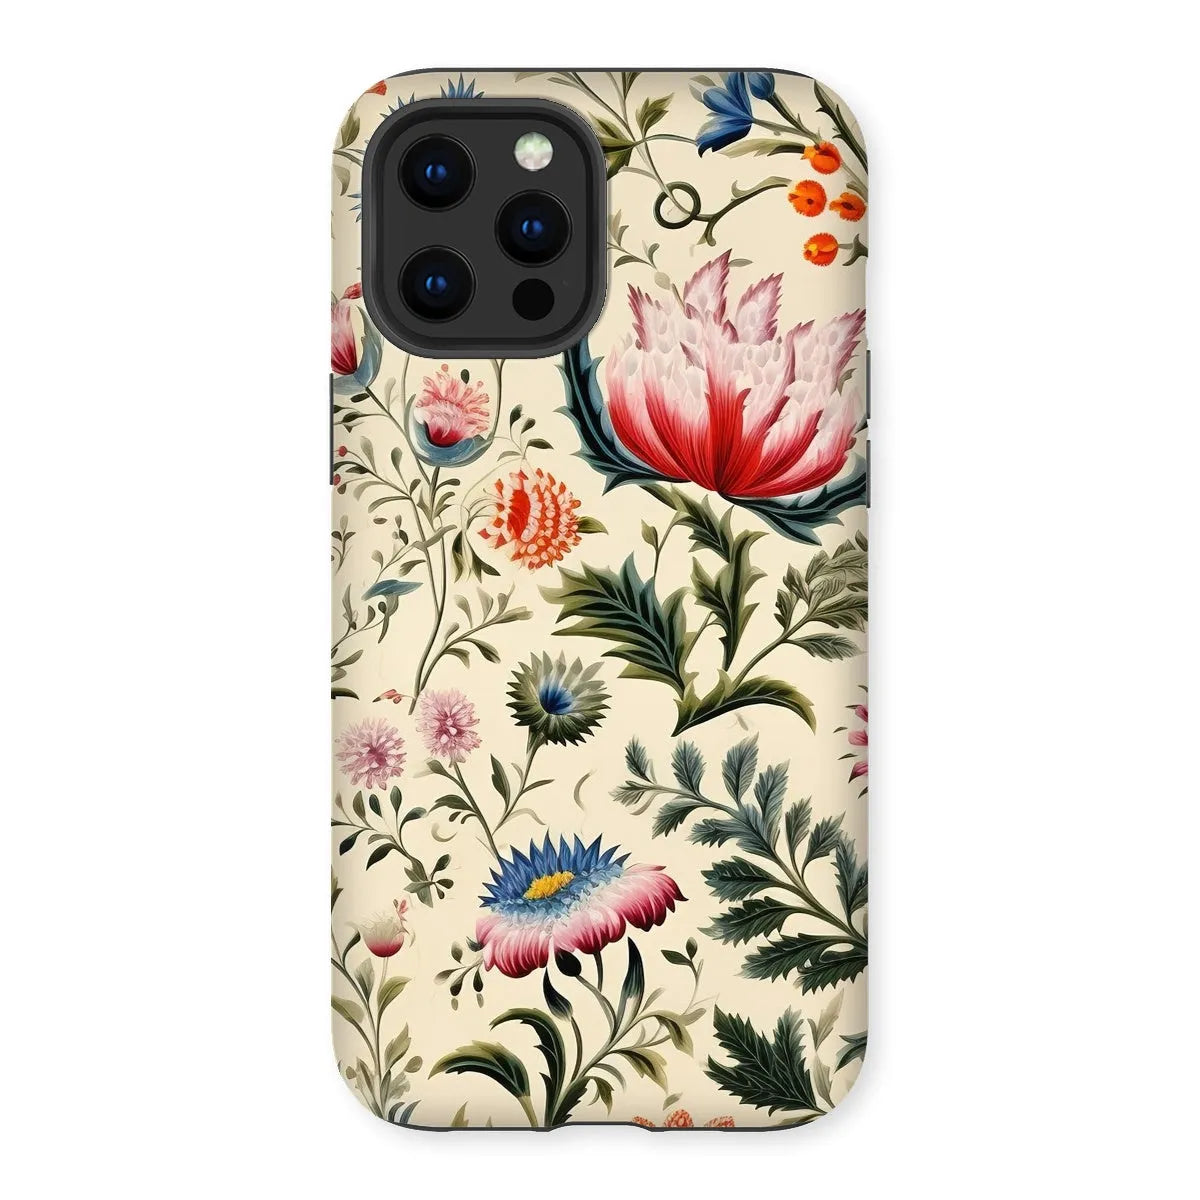 Wildflower Hoopla - Floral Garden Aesthetic Phone Case - Iphone 12 Pro Max / Matte - Mobile Phone Cases - Aesthetic Art